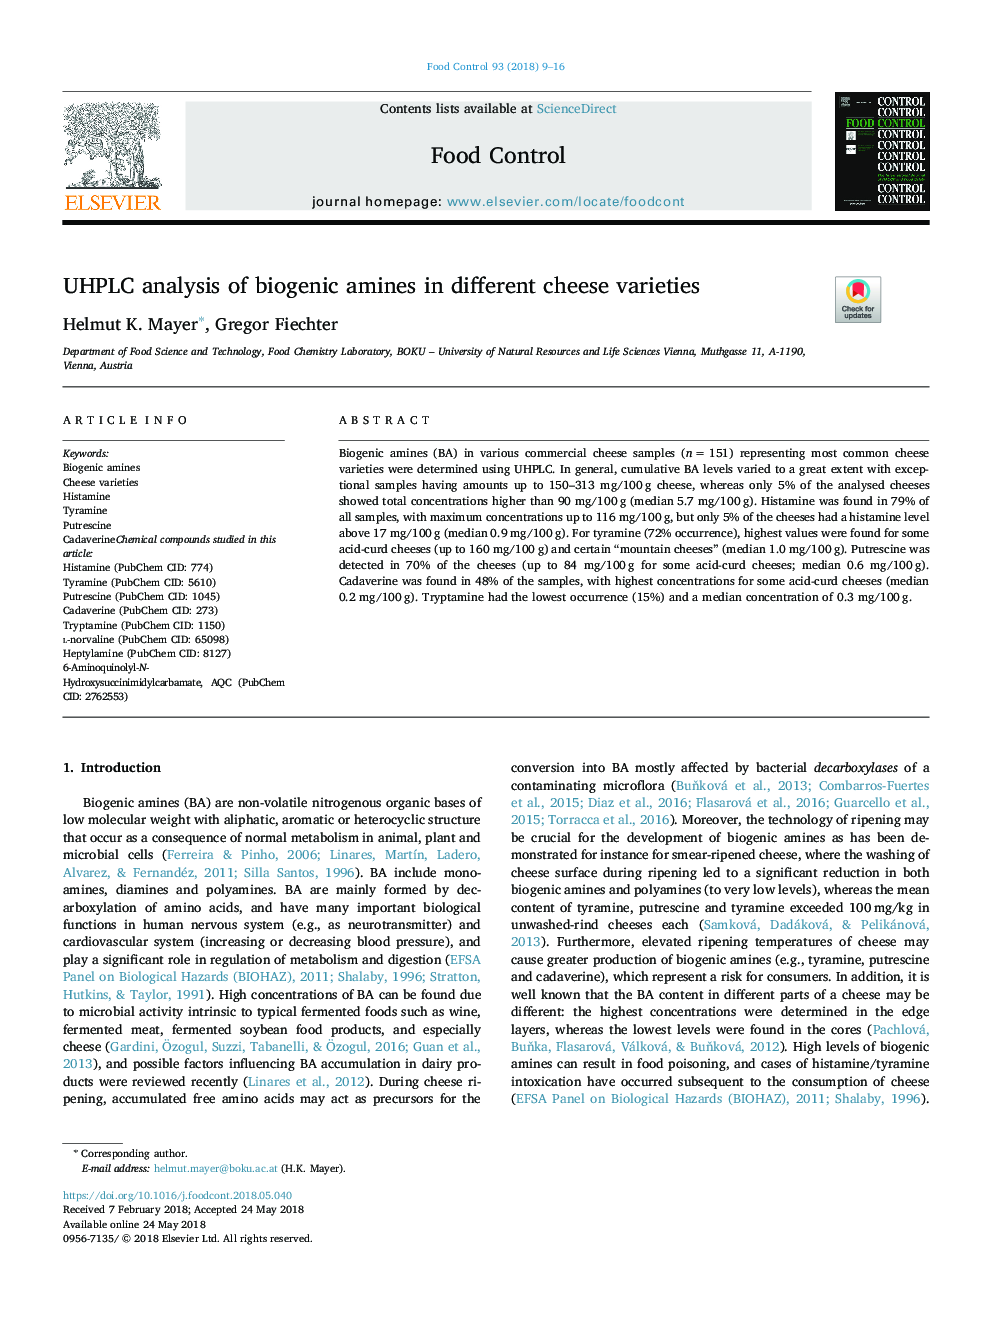 UHPLC analysis of biogenic amines in different cheese varieties